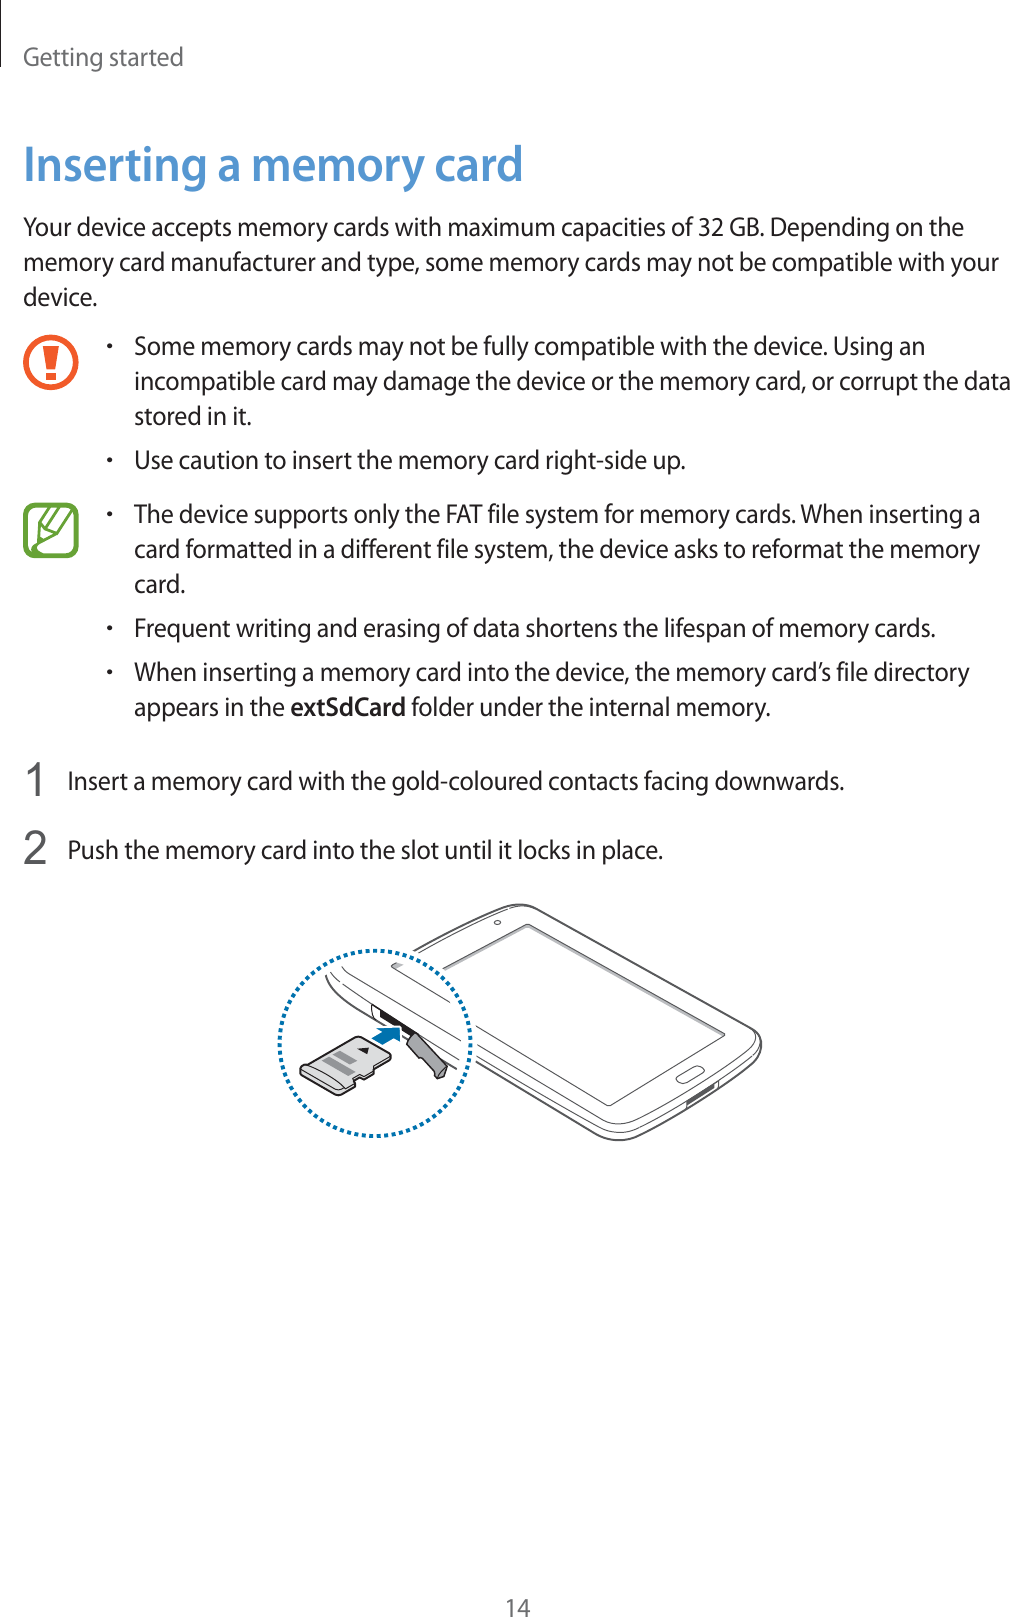 Getting started14Inserting a memory cardYour device accepts memory cards with maximum capacities of 32 GB. Depending on the memory card manufacturer and type, some memory cards may not be compatible with your device.rSome memory cards may not be fully compatible with the device. Using an incompatible card may damage the device or the memory card, or corrupt the data stored in it.rUse caution to insert the memory card right-side up.rThe device supports only the FAT file system for memory cards. When inserting a card formatted in a different file system, the device asks to reformat the memory card.rFrequent writing and erasing of data shortens the lifespan of memory cards.rWhen inserting a memory card into the device, the memory card’s file directory appears in the extSdCard folder under the internal memory.1  Insert a memory card with the gold-coloured contacts facing downwards.2  Push the memory card into the slot until it locks in place.